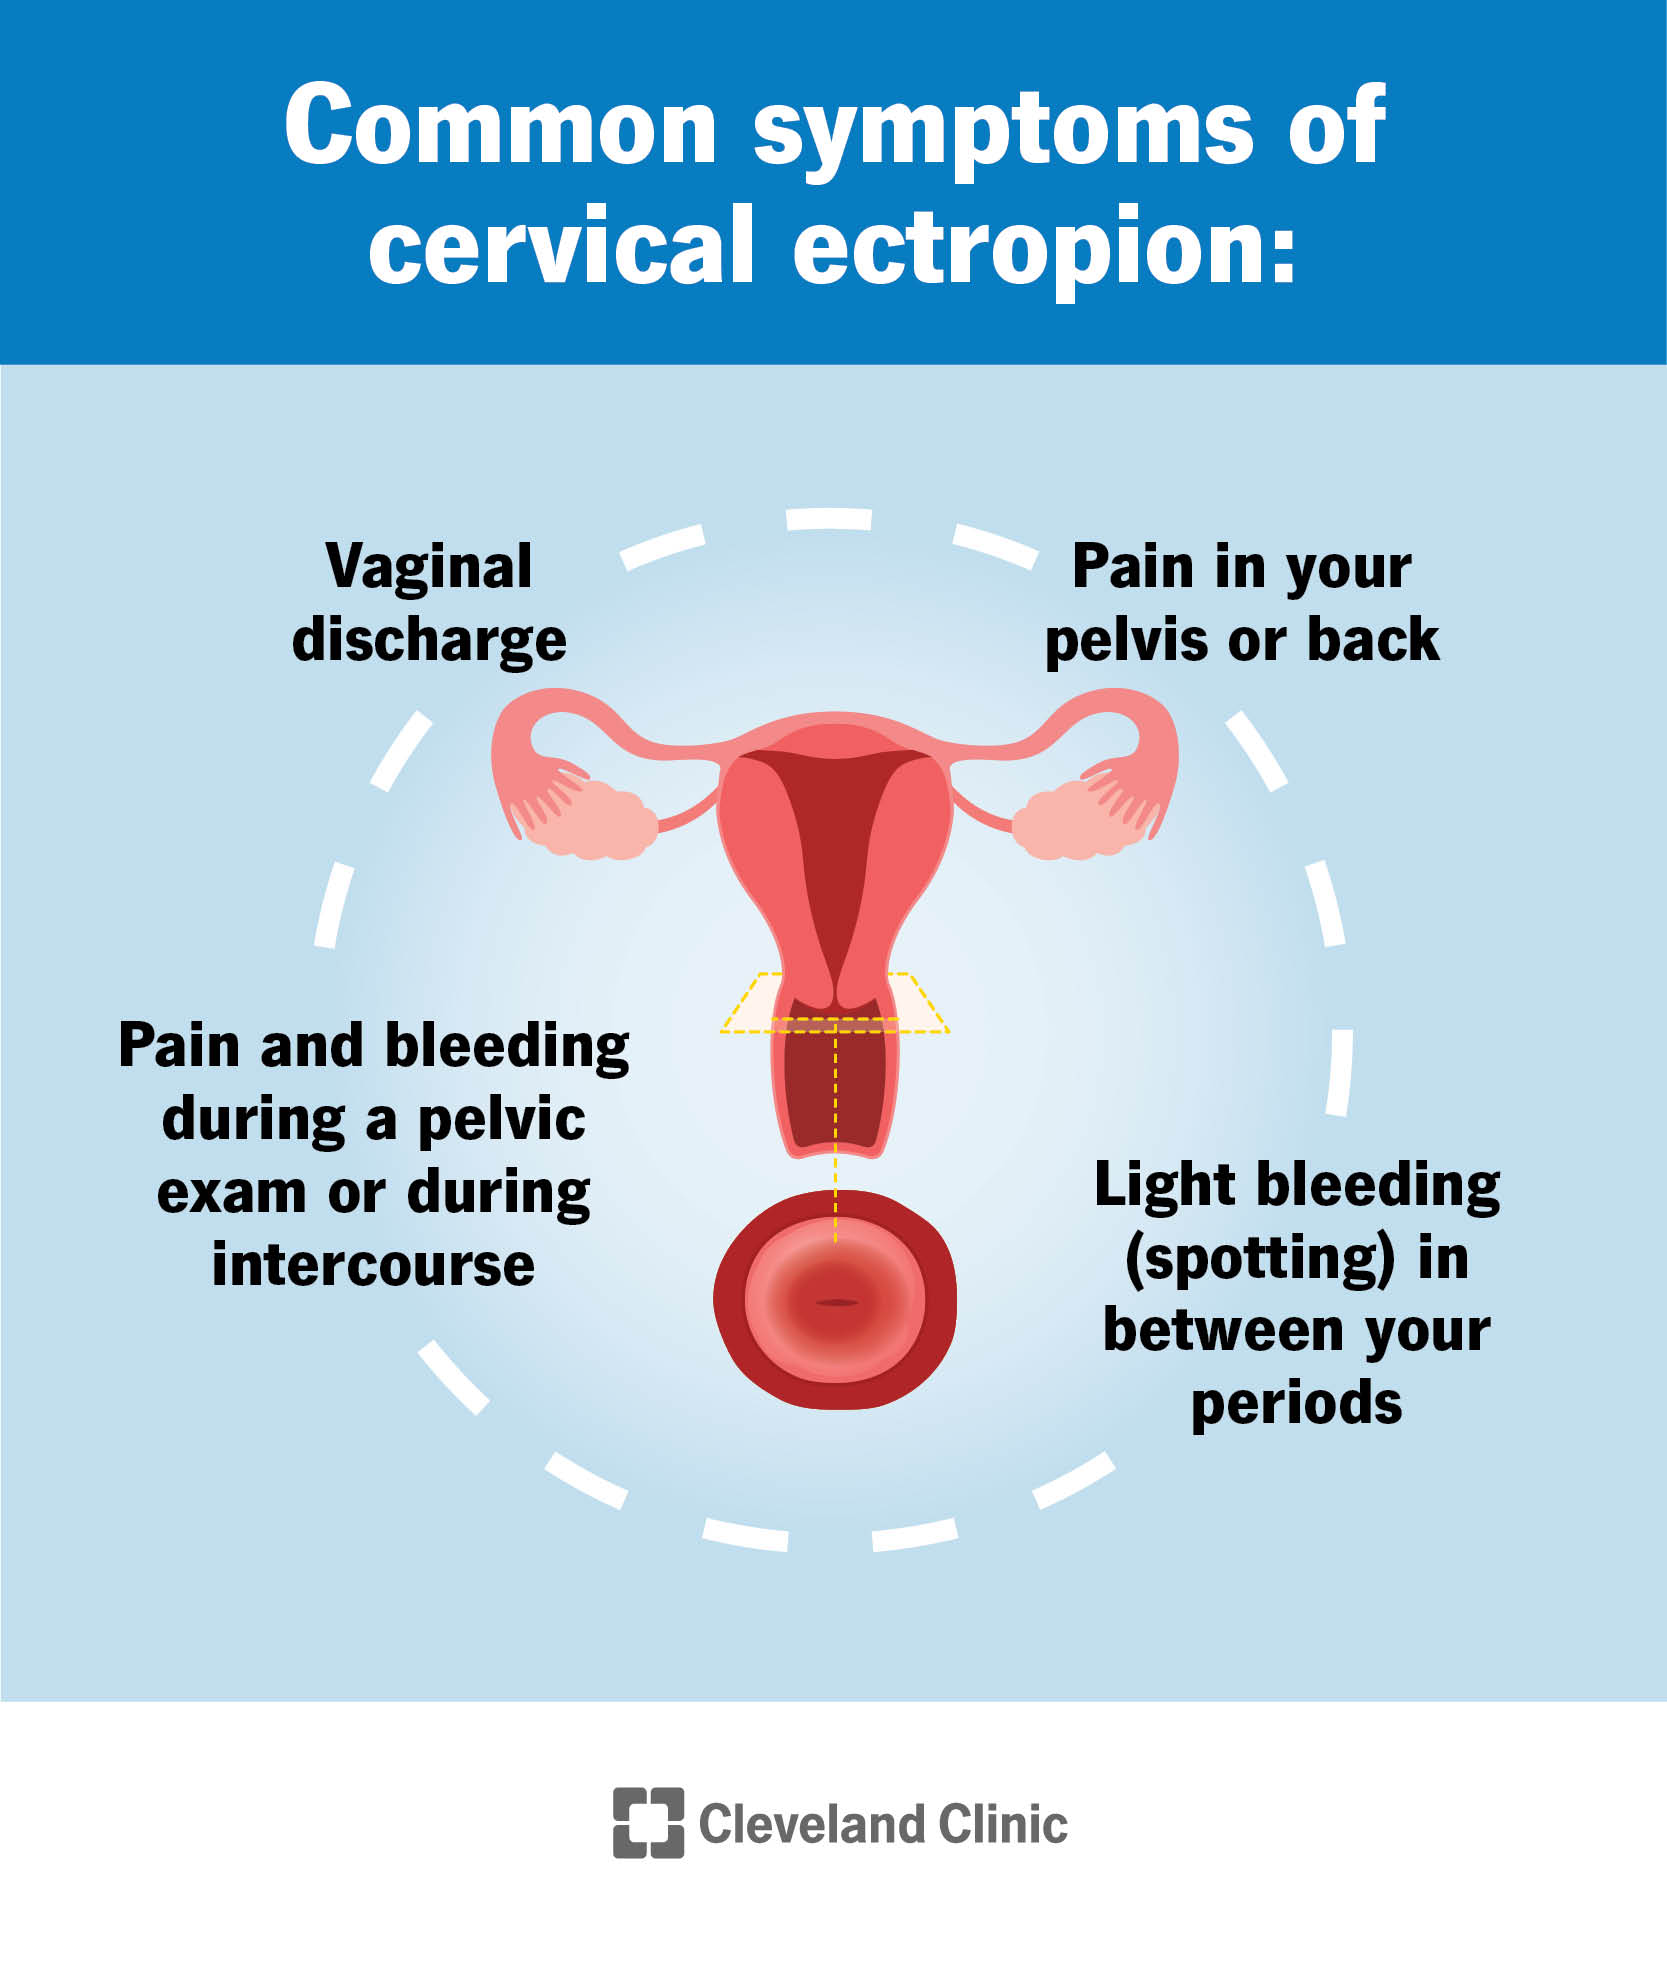 Reproductive system of a person assigned female at birth, with a focus on the cervix. Accompanying text summarizes the common symptoms of cervical ectropion.